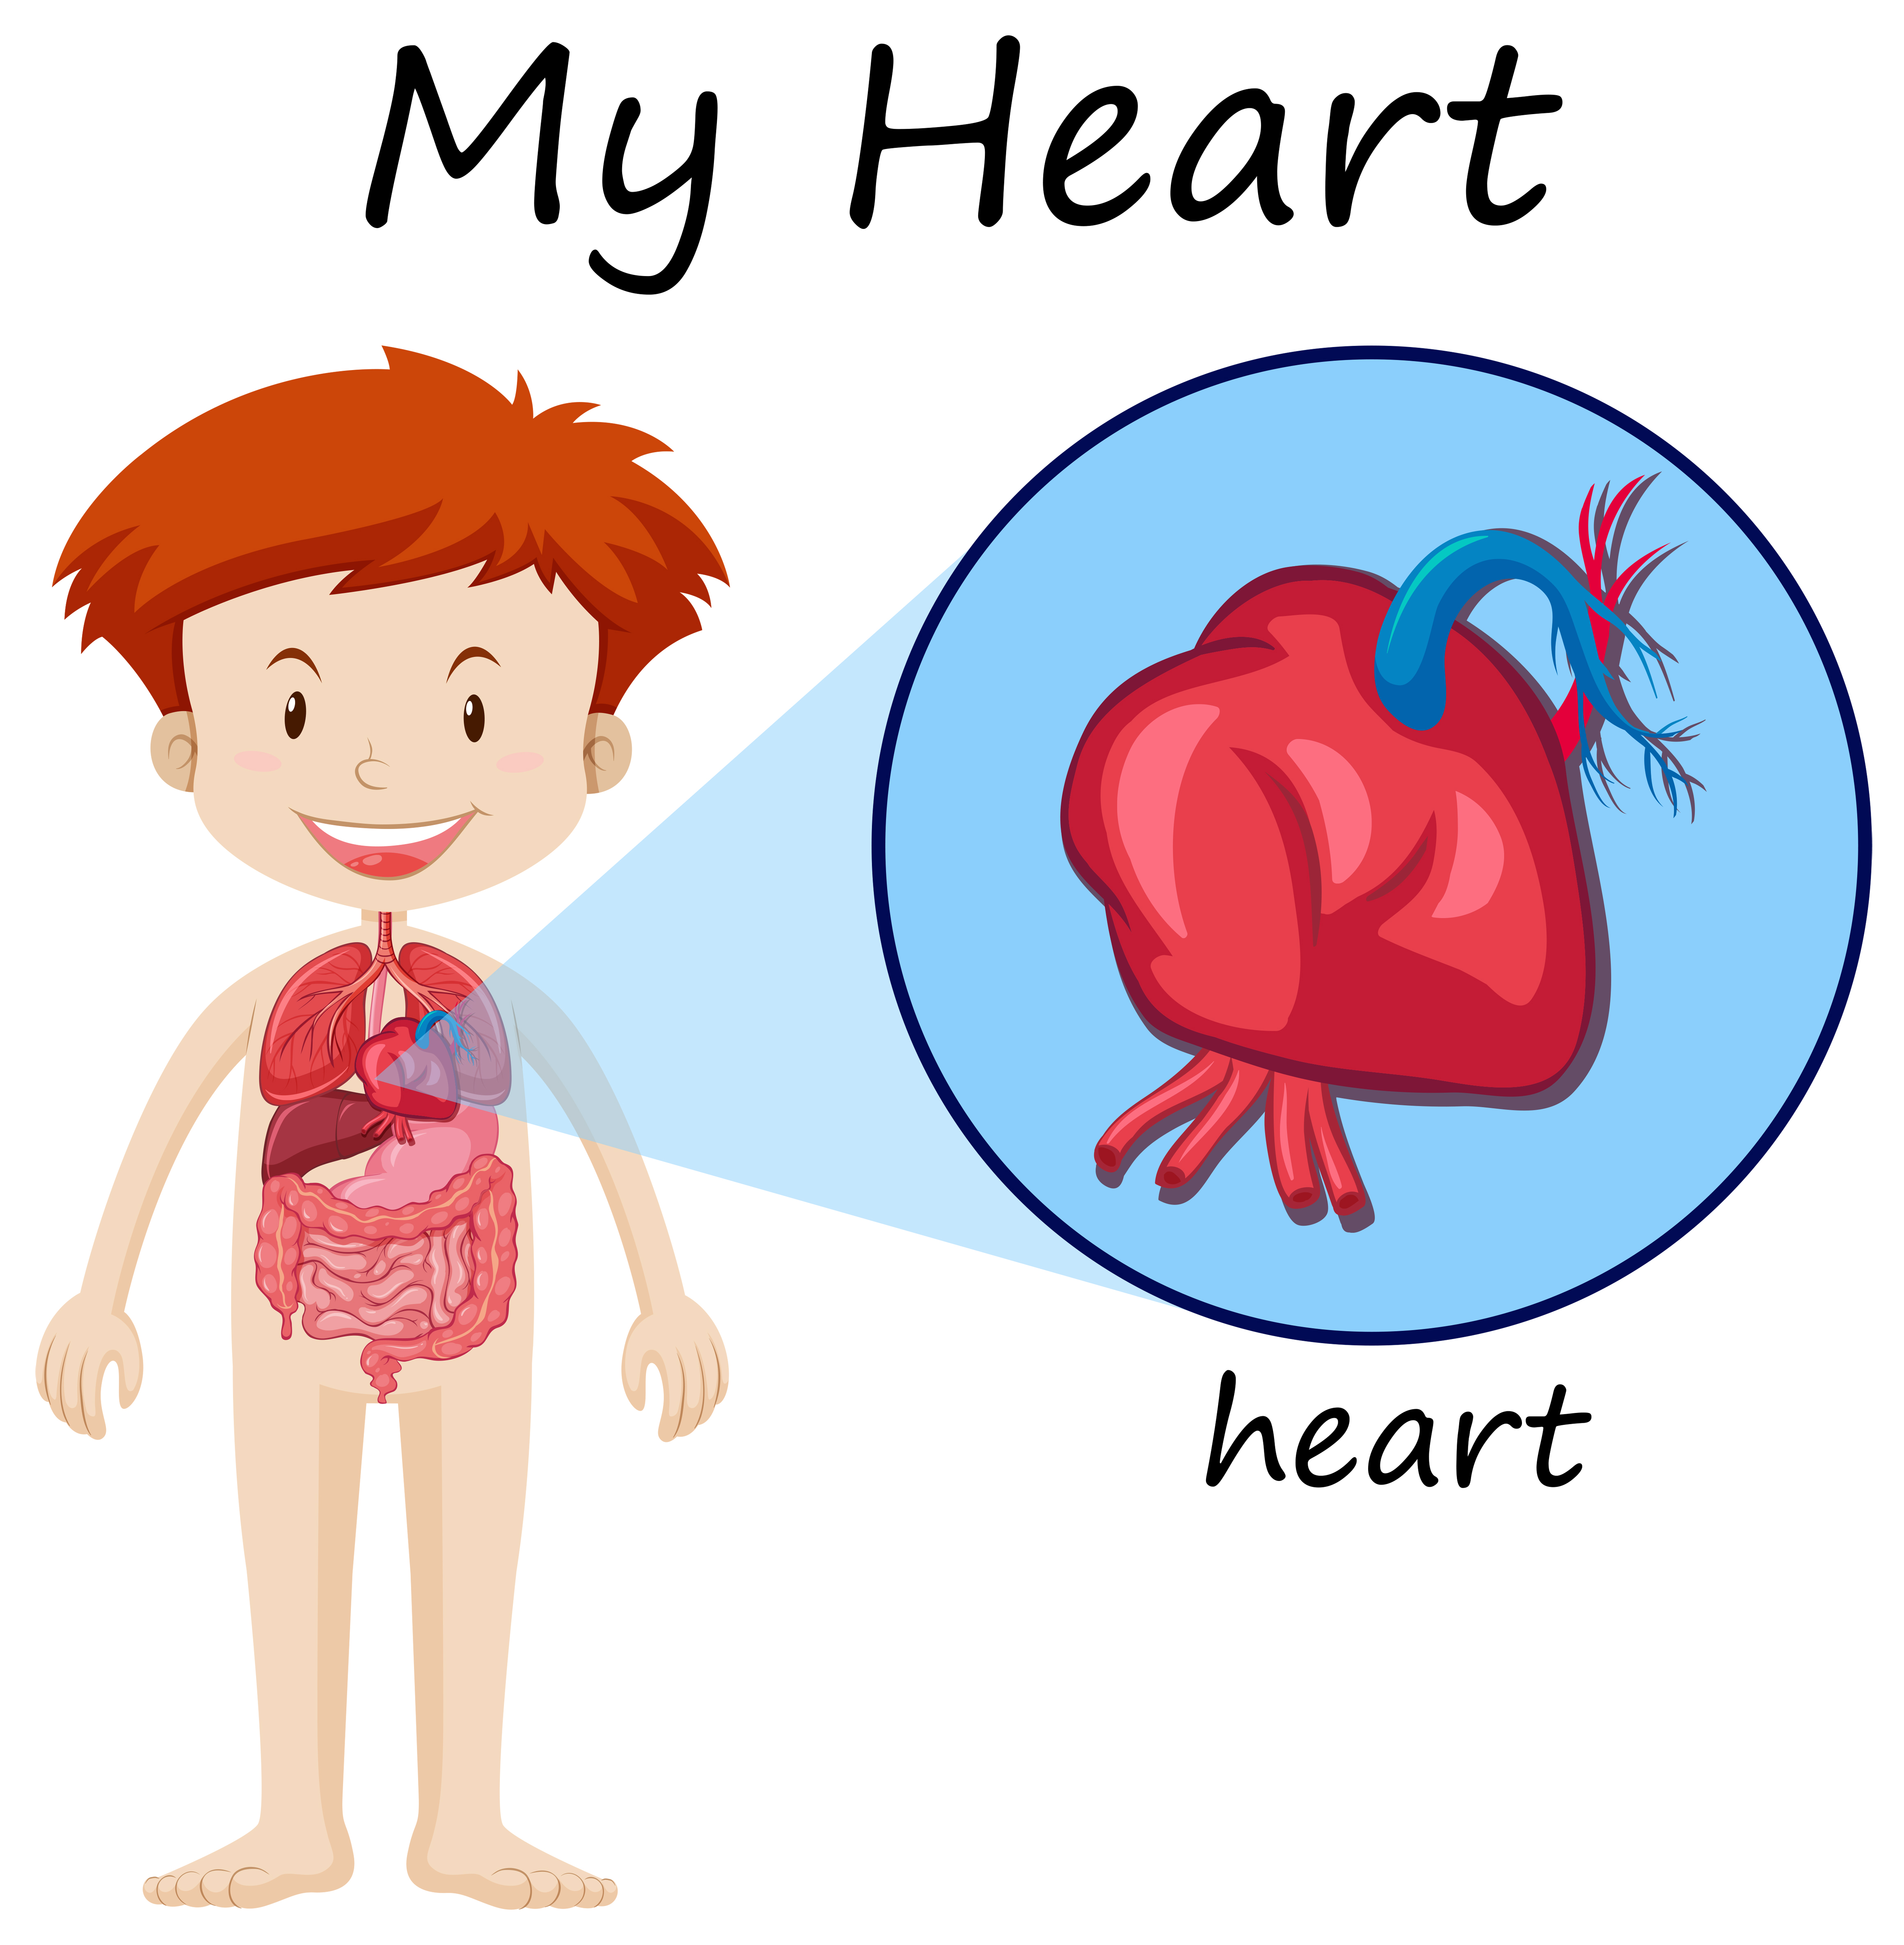 Human Anatomy Diagram With Boy And Heart Download Free Vectors Clipart Graphics Vector Art